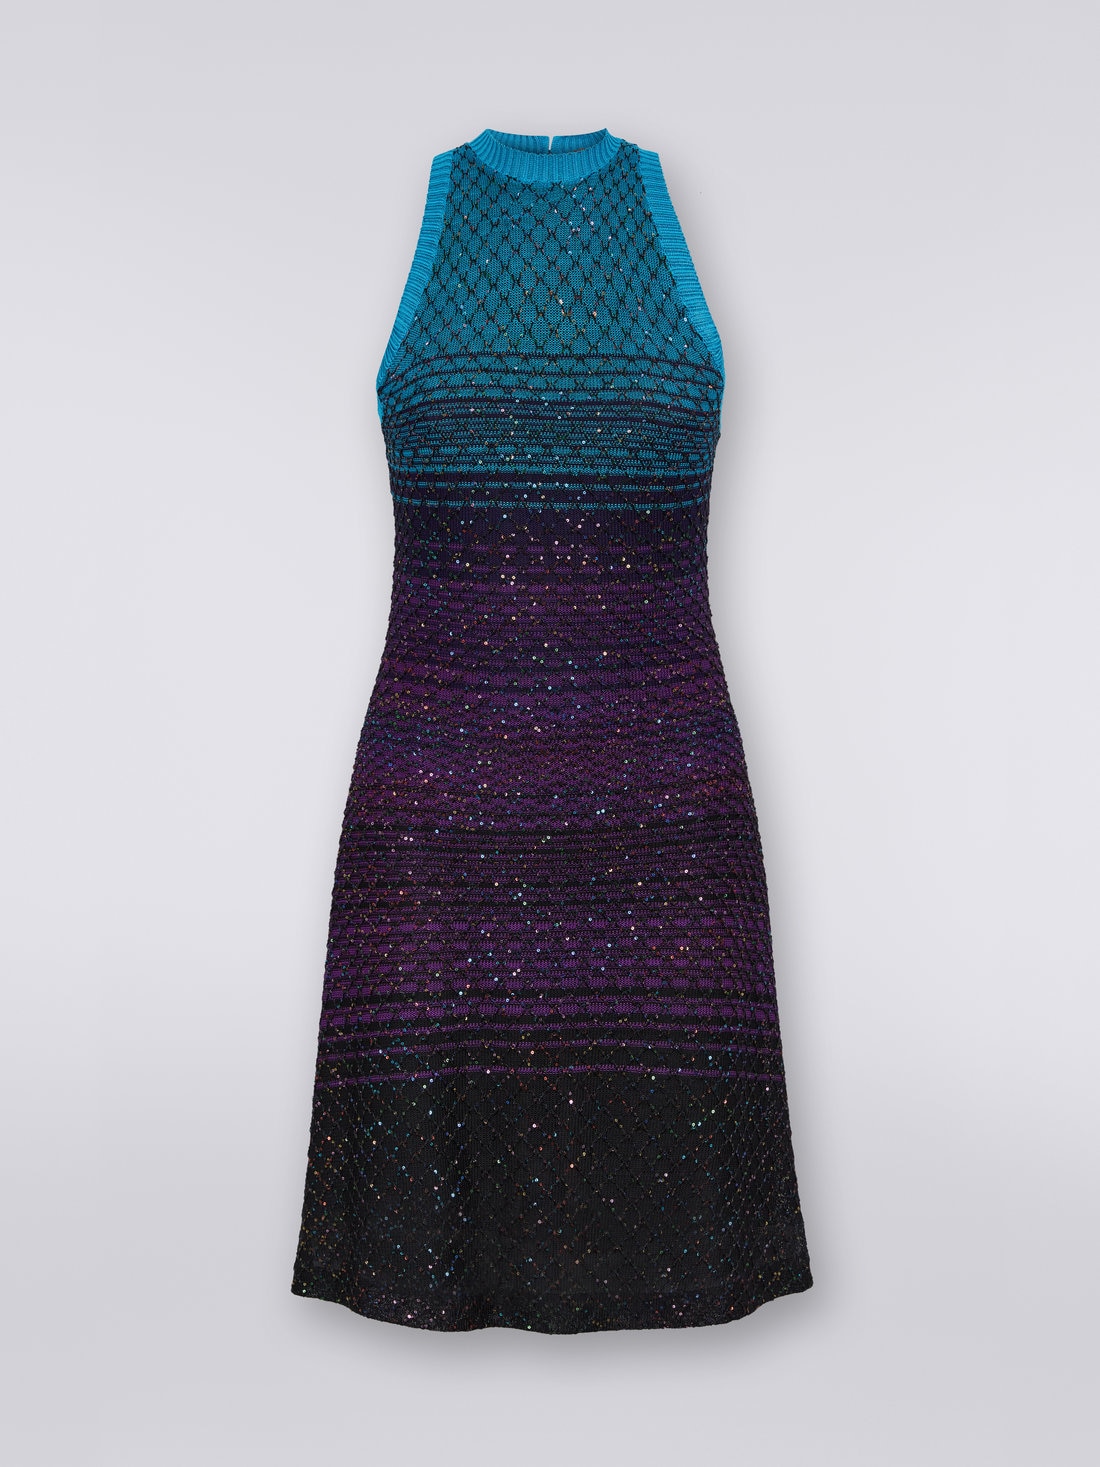 Sleeveless mesh dress with sequins, Turquoise, Purple & Black - DS23SG28BK022ISM8NJ - 0